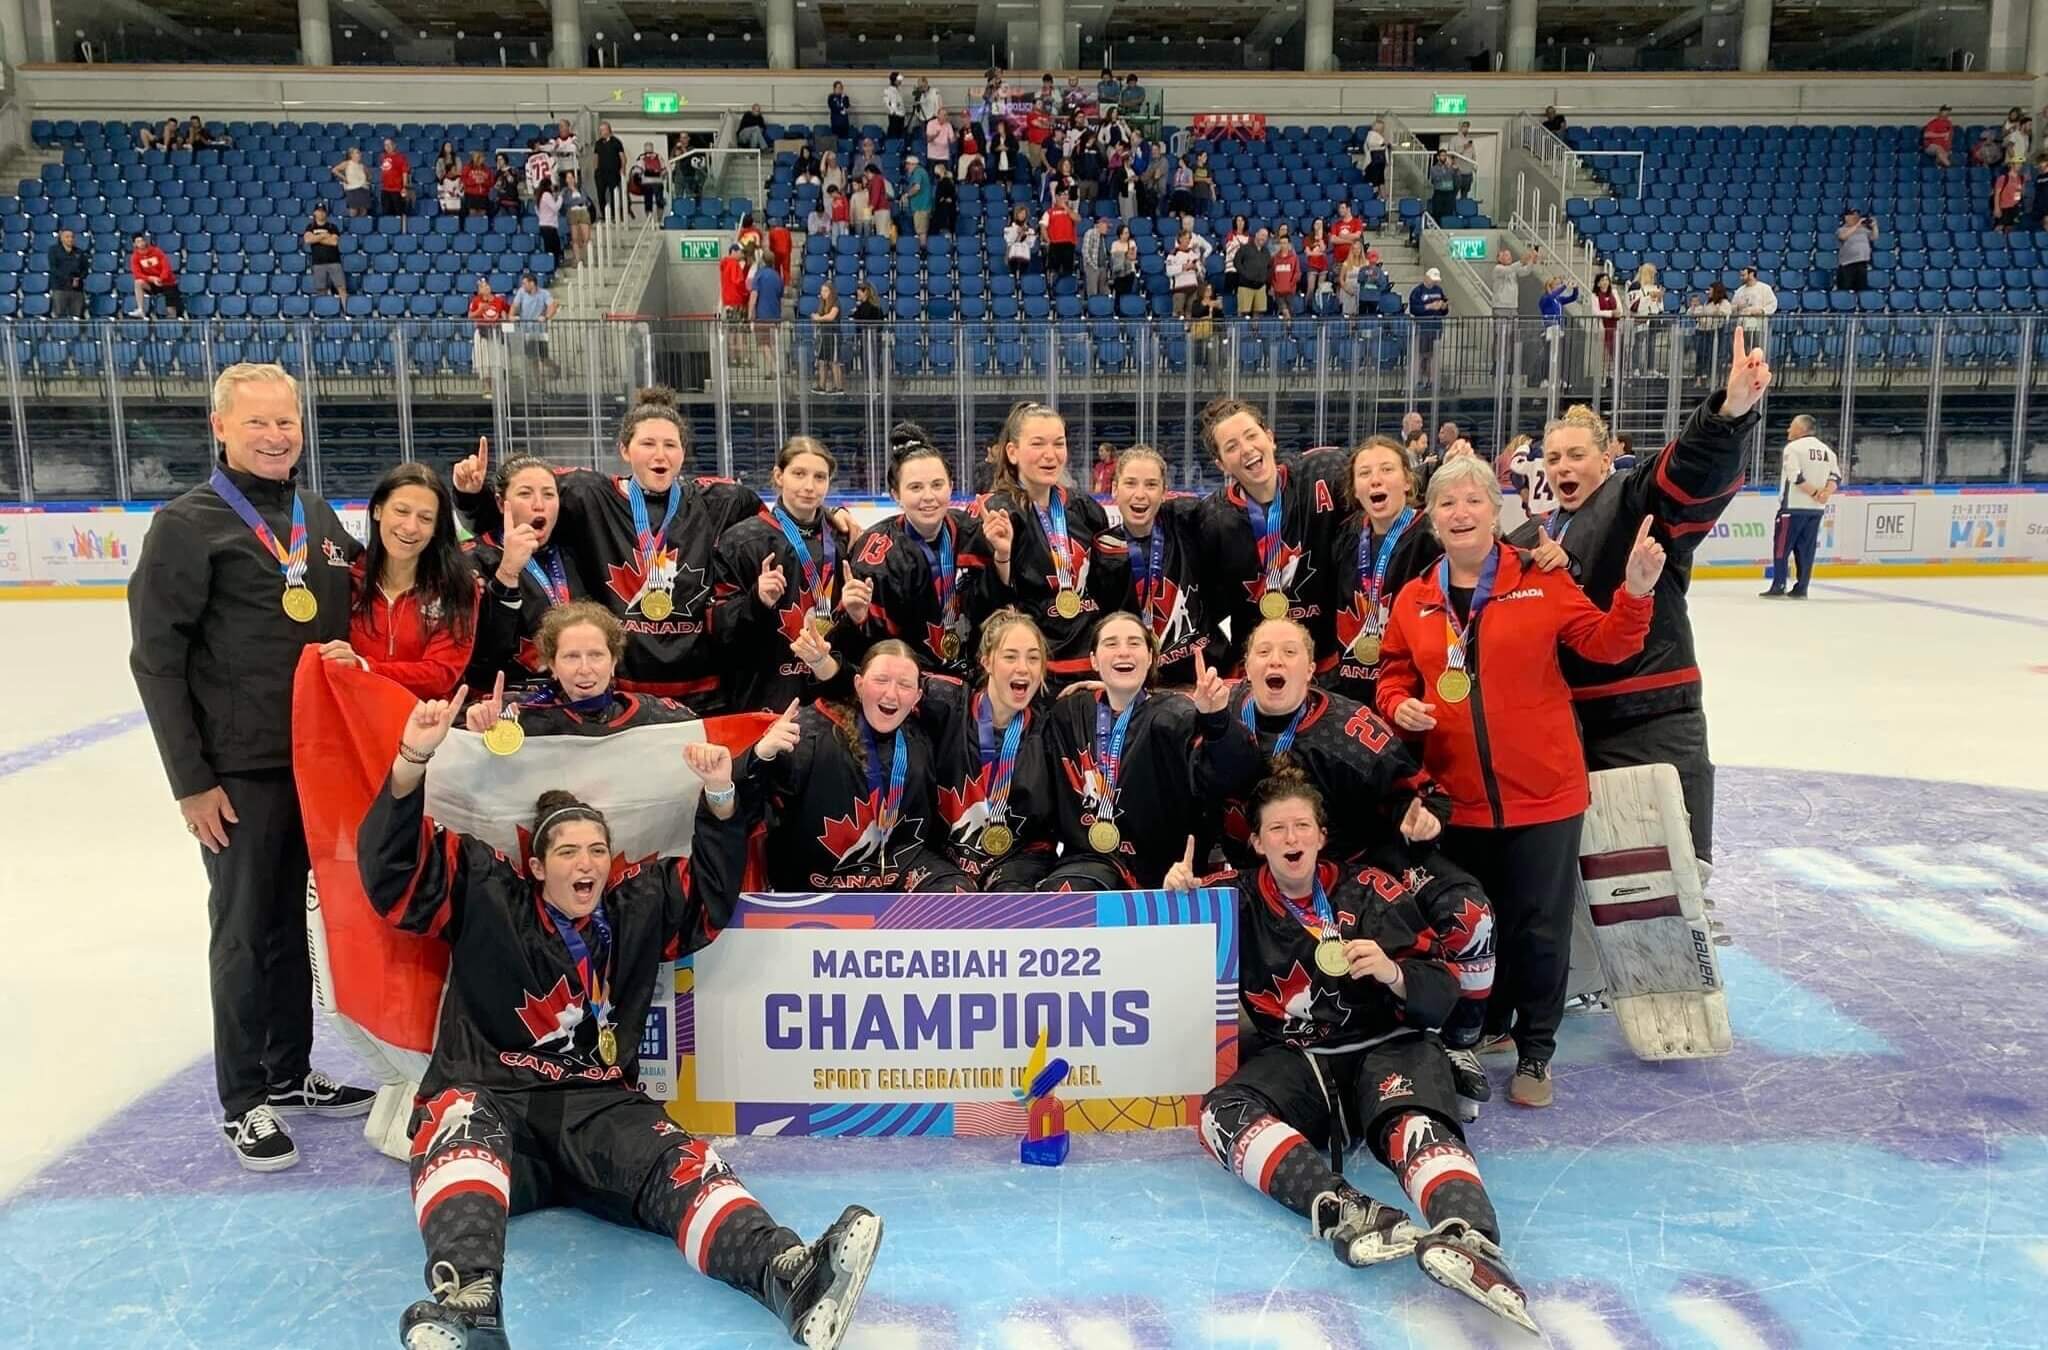 The Canadian team celebrates after winning the gold medal by defeating the U.S., 6-2, in Friday's championship game in the debut of women's hockey at the Maccabiah Games. Coach Peter Smith stands left; Melissa Wronzberg, Canada’s captain, reclines, bottom right. 